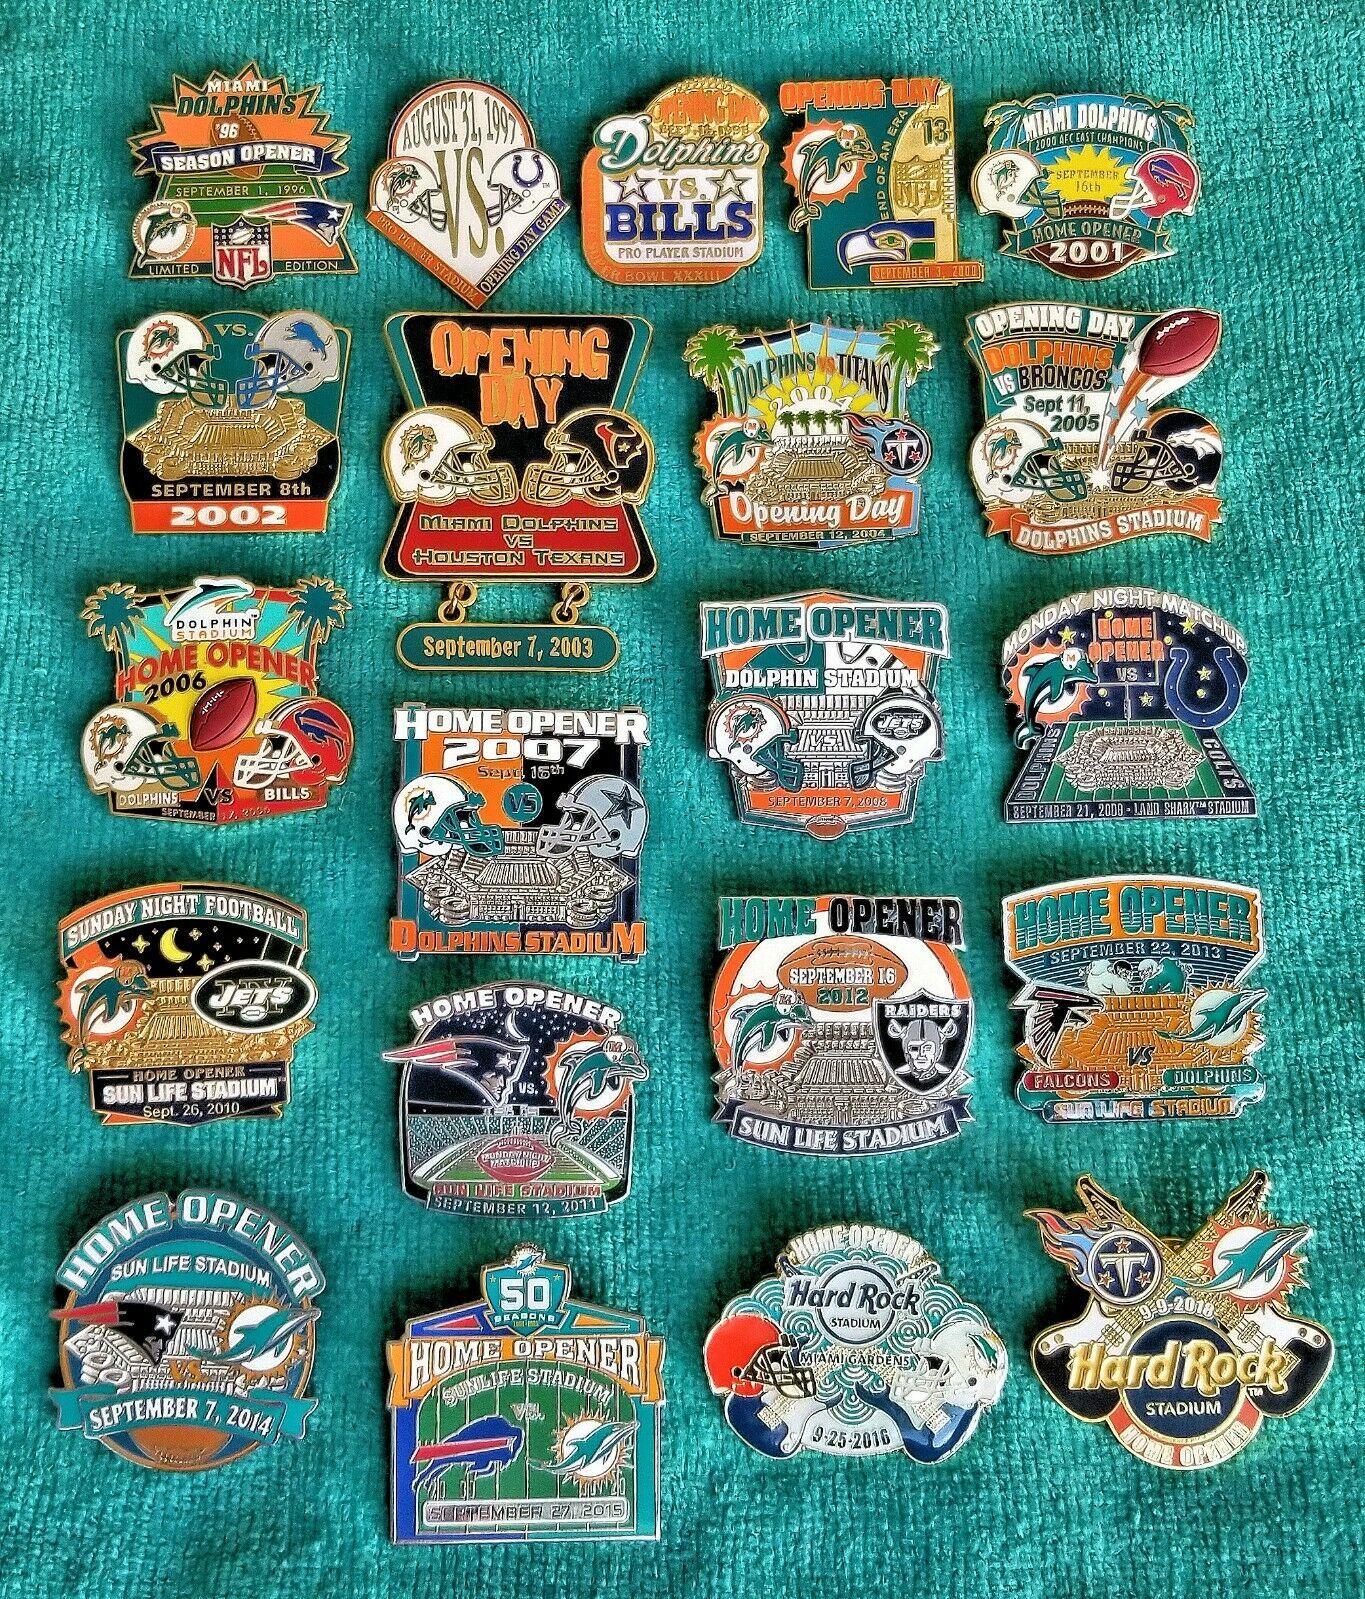 23 - MIAMI DOLPHINS "HOME OPENER" - TEAM LAPEL PINS - COMPLETE SET  NFL GO FINS! - $272.20